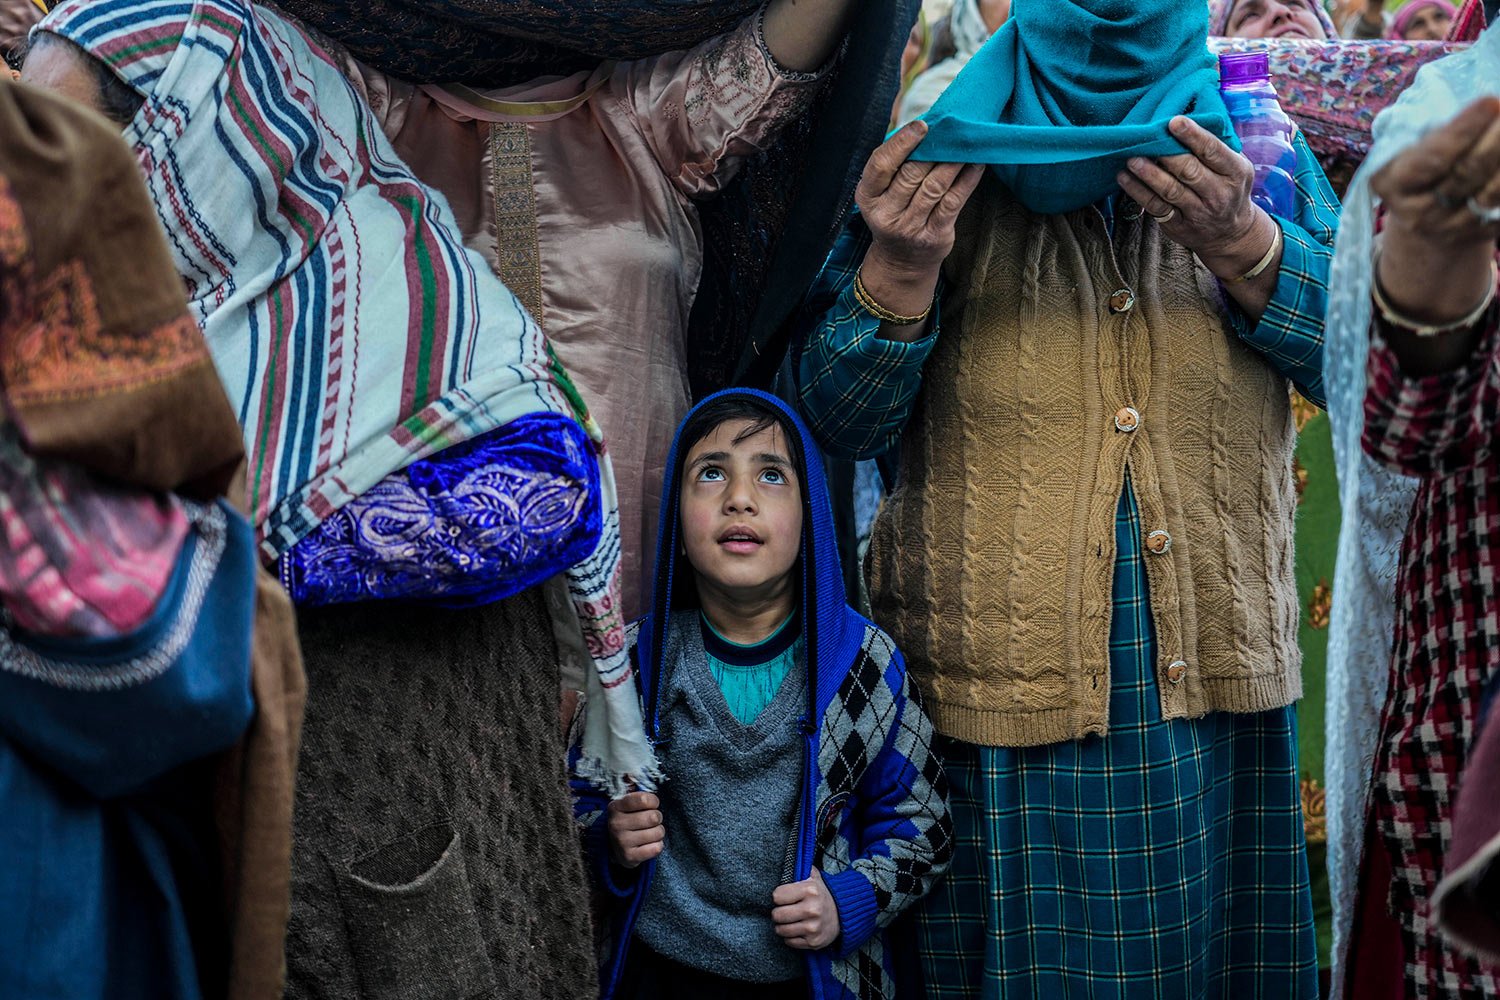  A Kashmiri Muslim boy stands with elders as the head priest displays a holy relic believed to be a hair from the beard of the Prophet Muhammad during special prayers to observe the martyr day of Hazrat Ali, the fourth caliph of Islam, at Hazratbal s